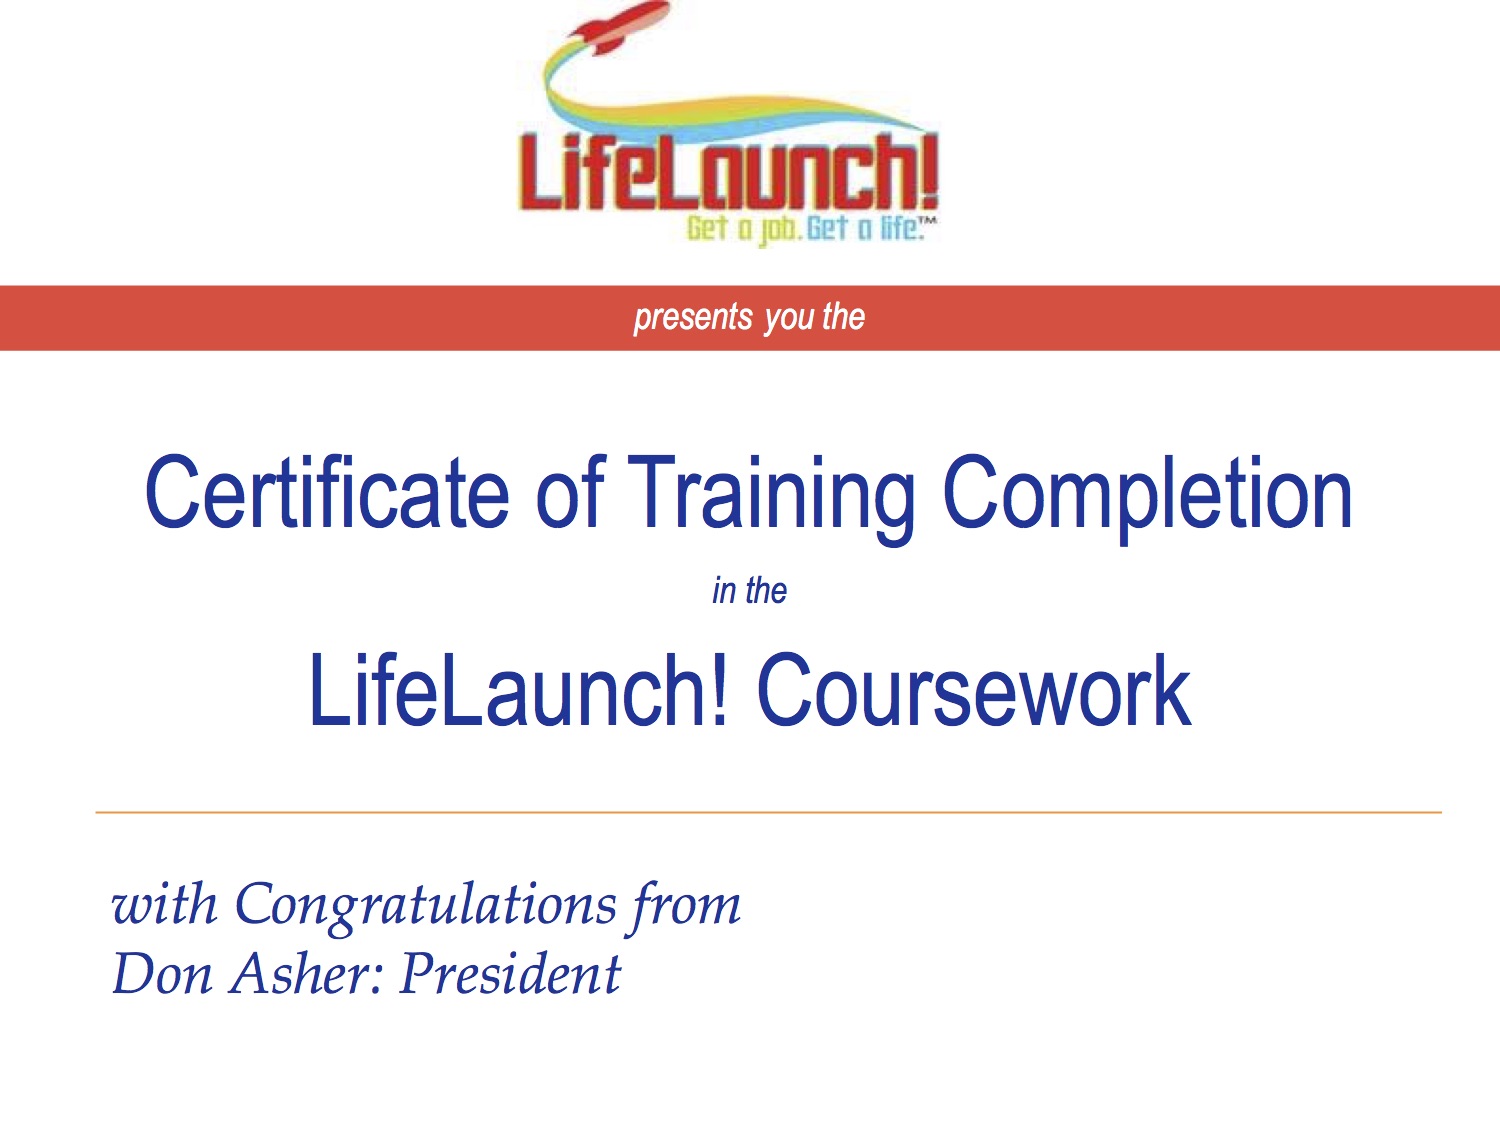 LifeLaunch! Certificate of Completion